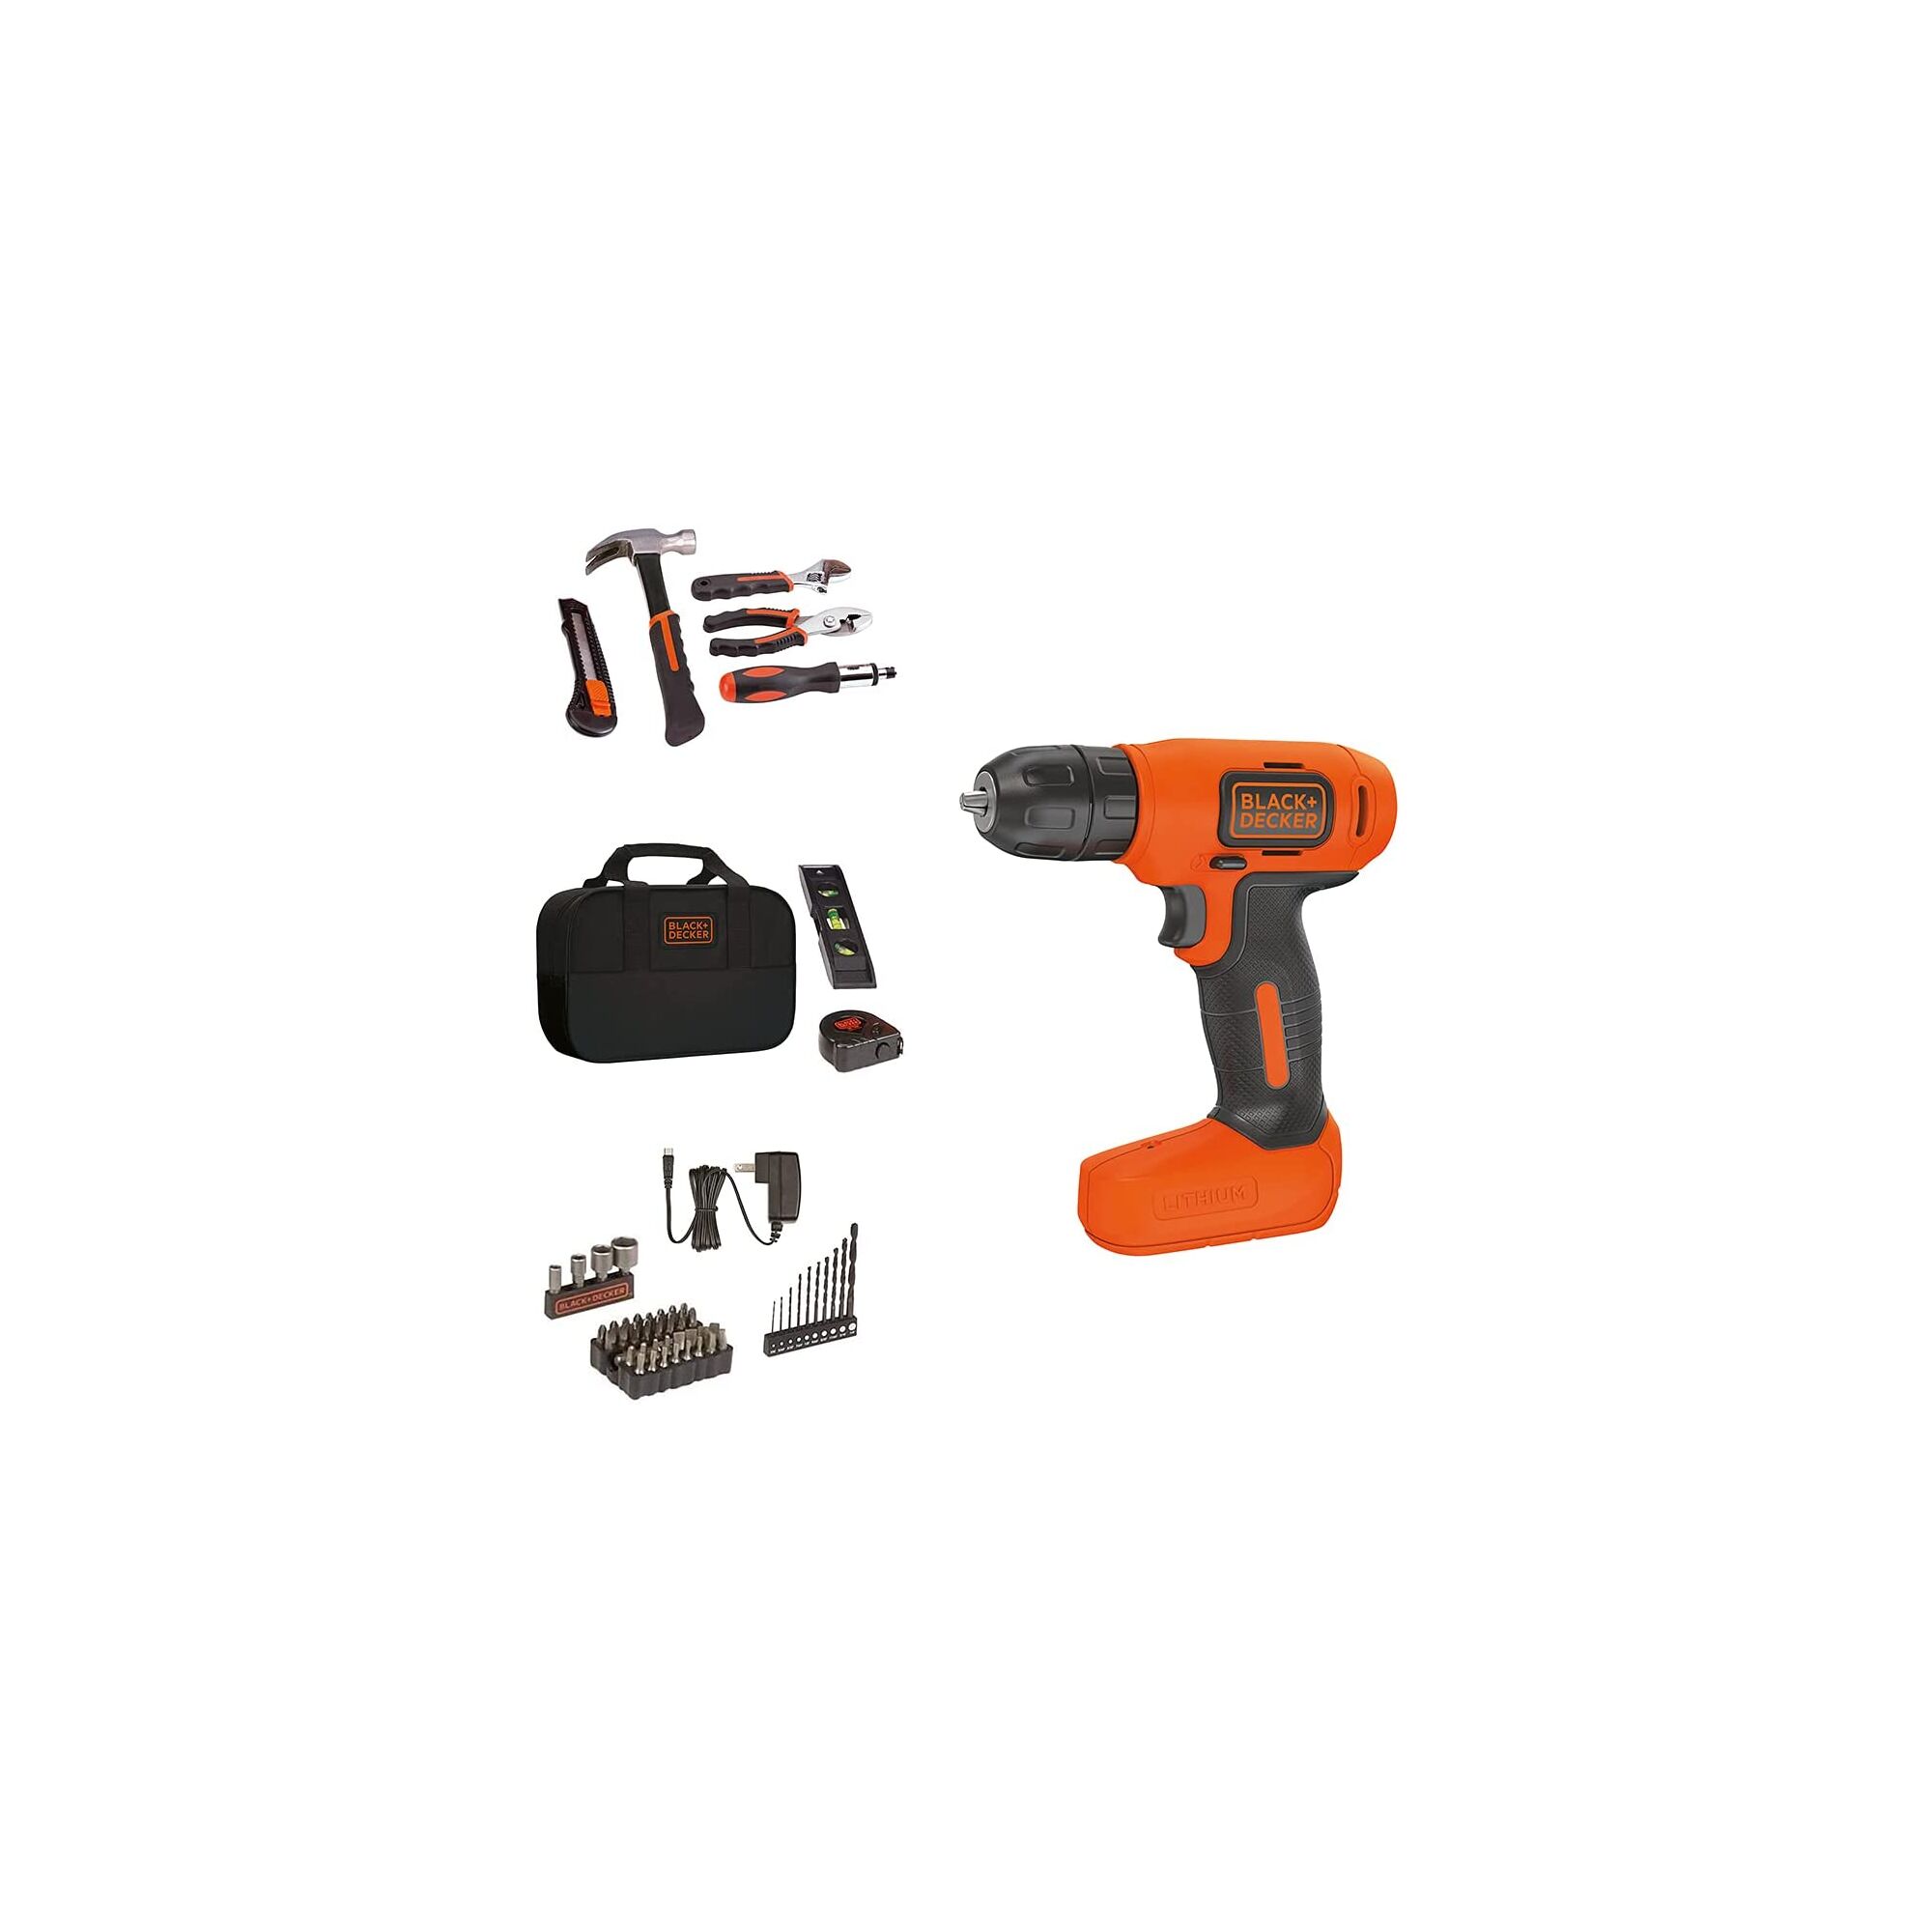 Profile of 8 volt max cordless lithium drill next to various accessories that are part of a 57 piece kit